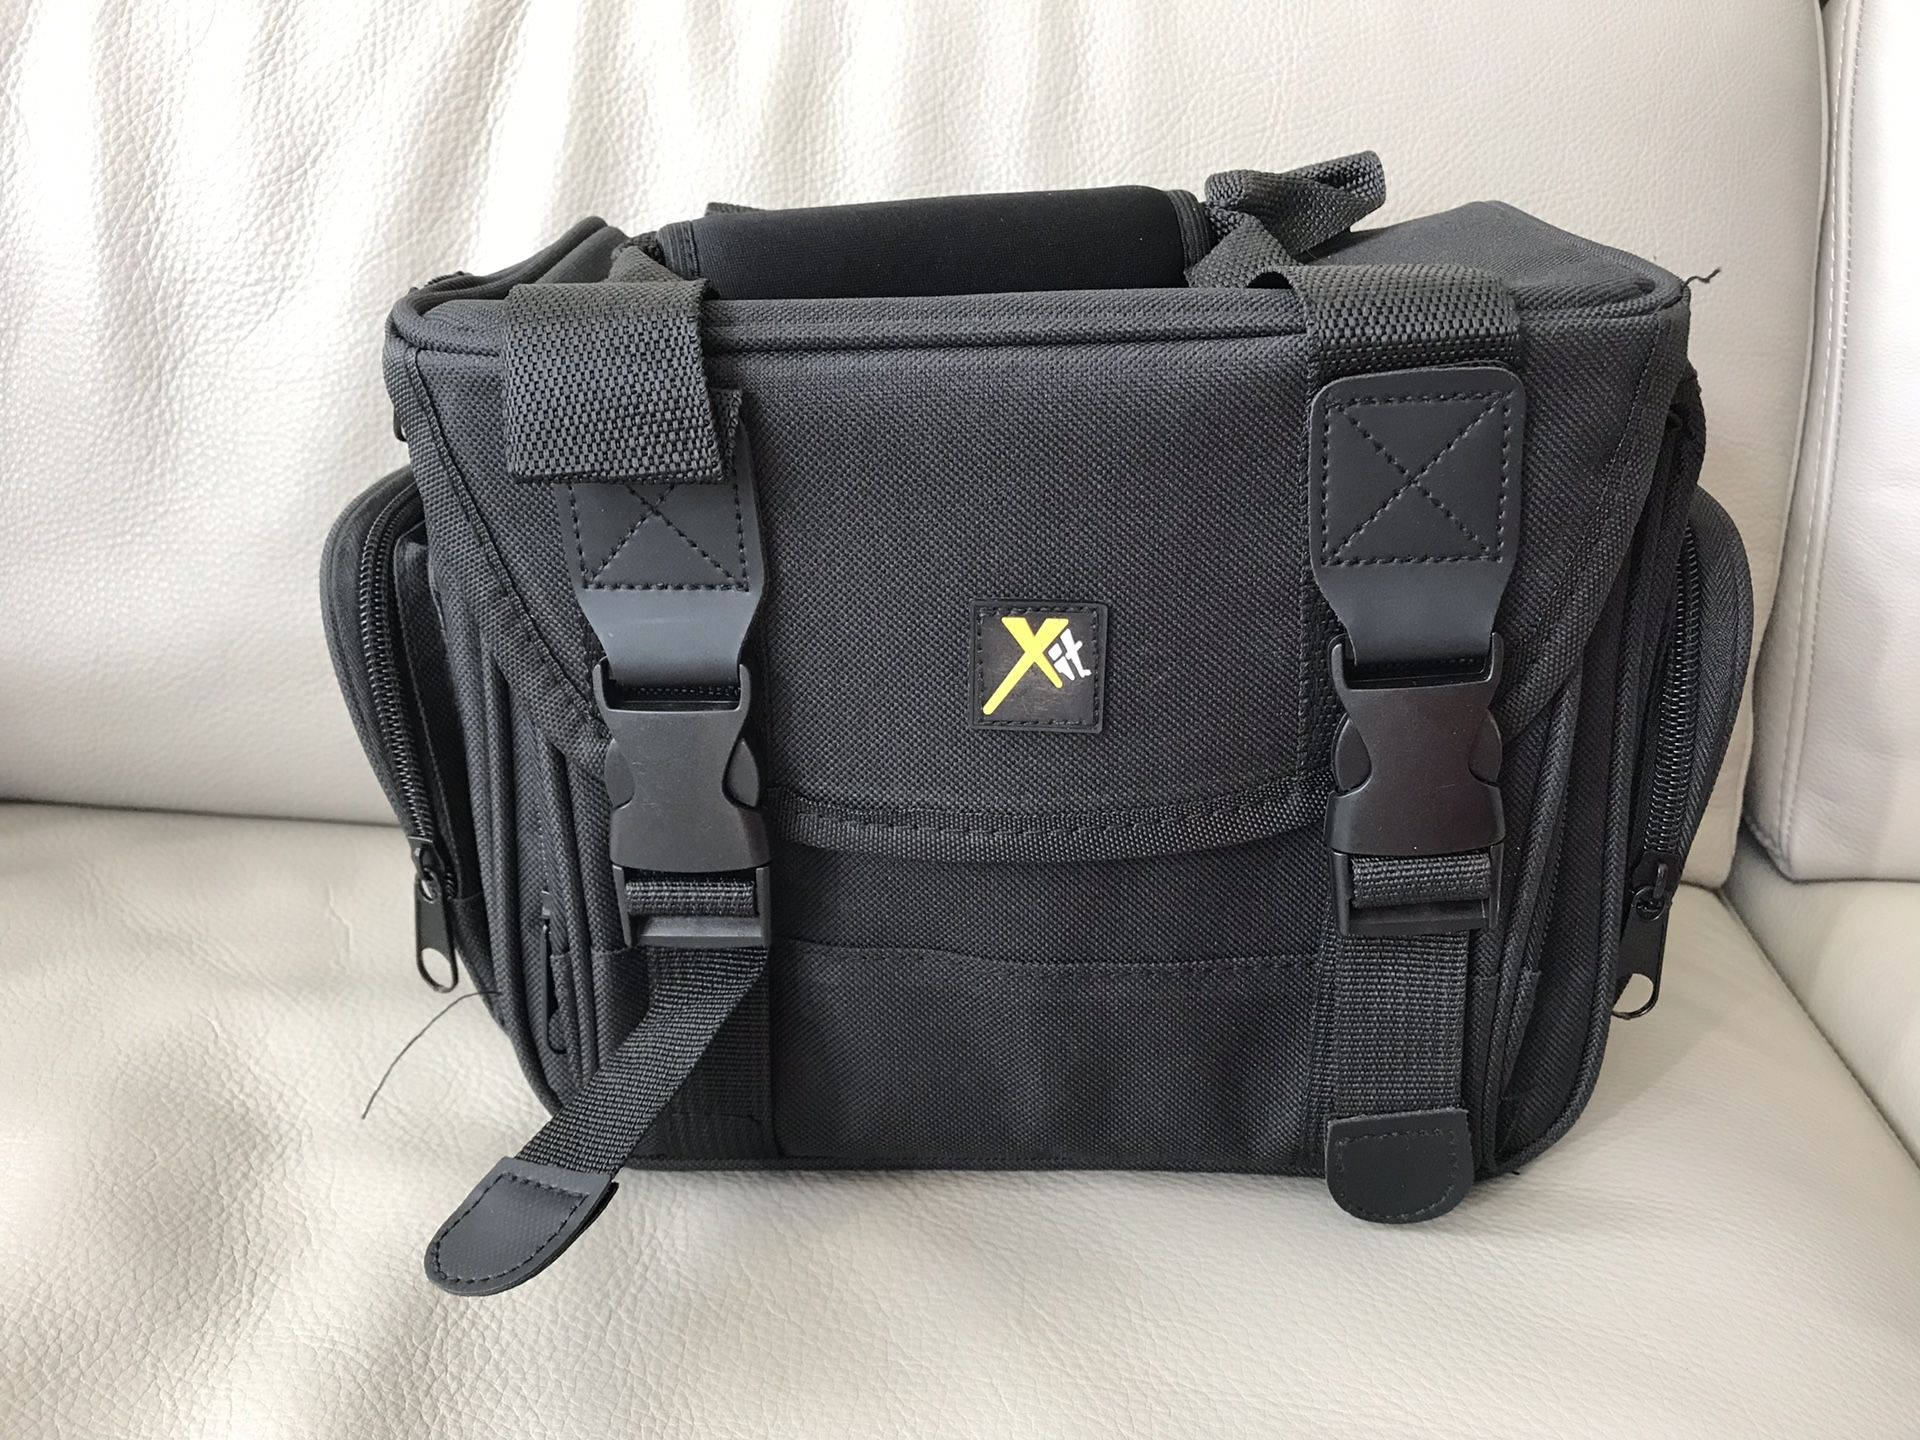 Brand new Xit XTCC4 Deluxe Digital Camera/Video Padded Carrying Case, Medium (Black)